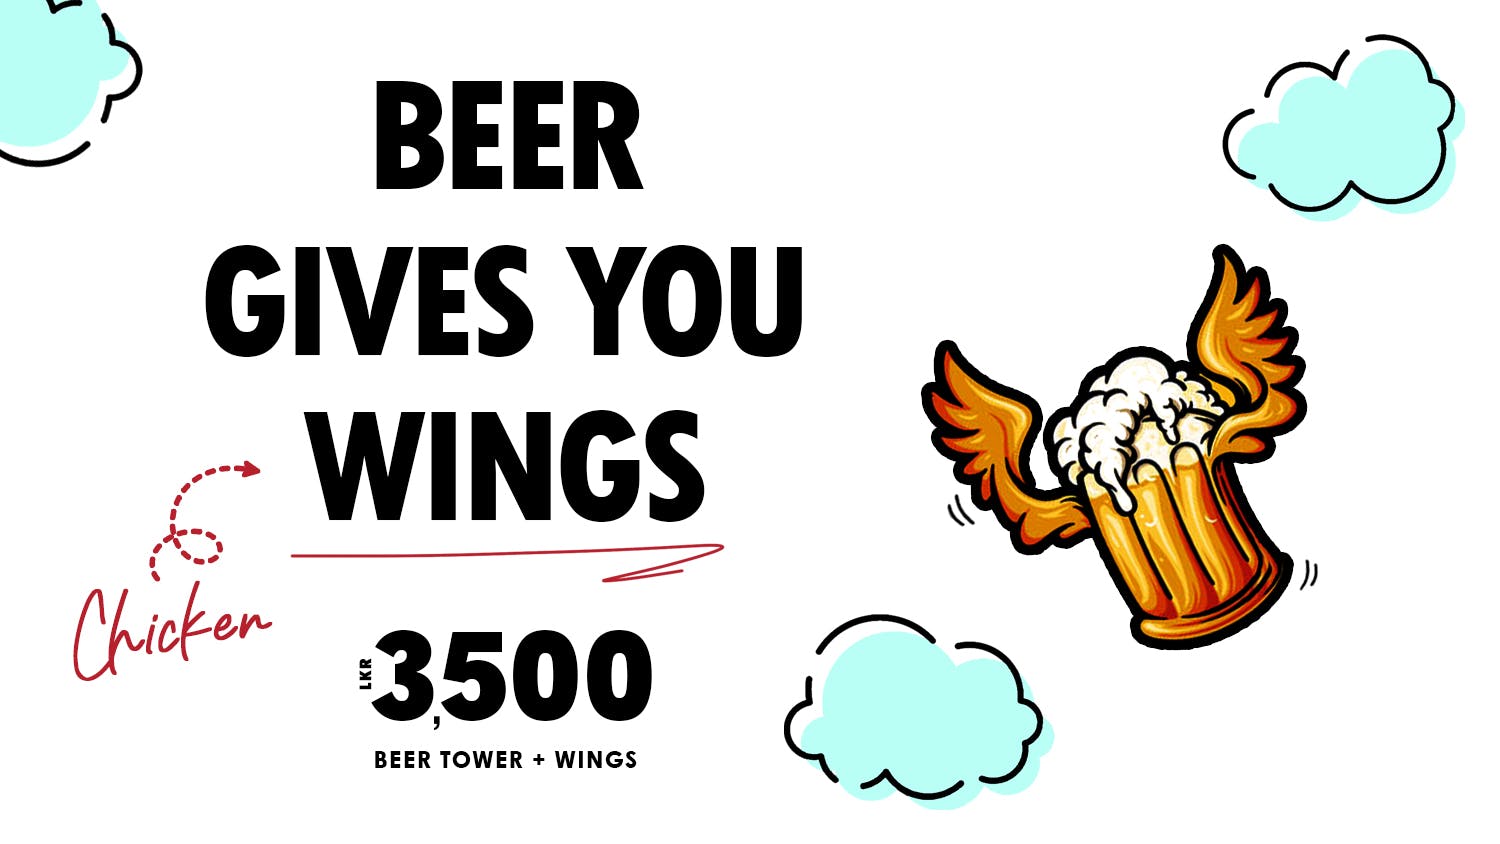 Beer and Wings Promotion at Weligama